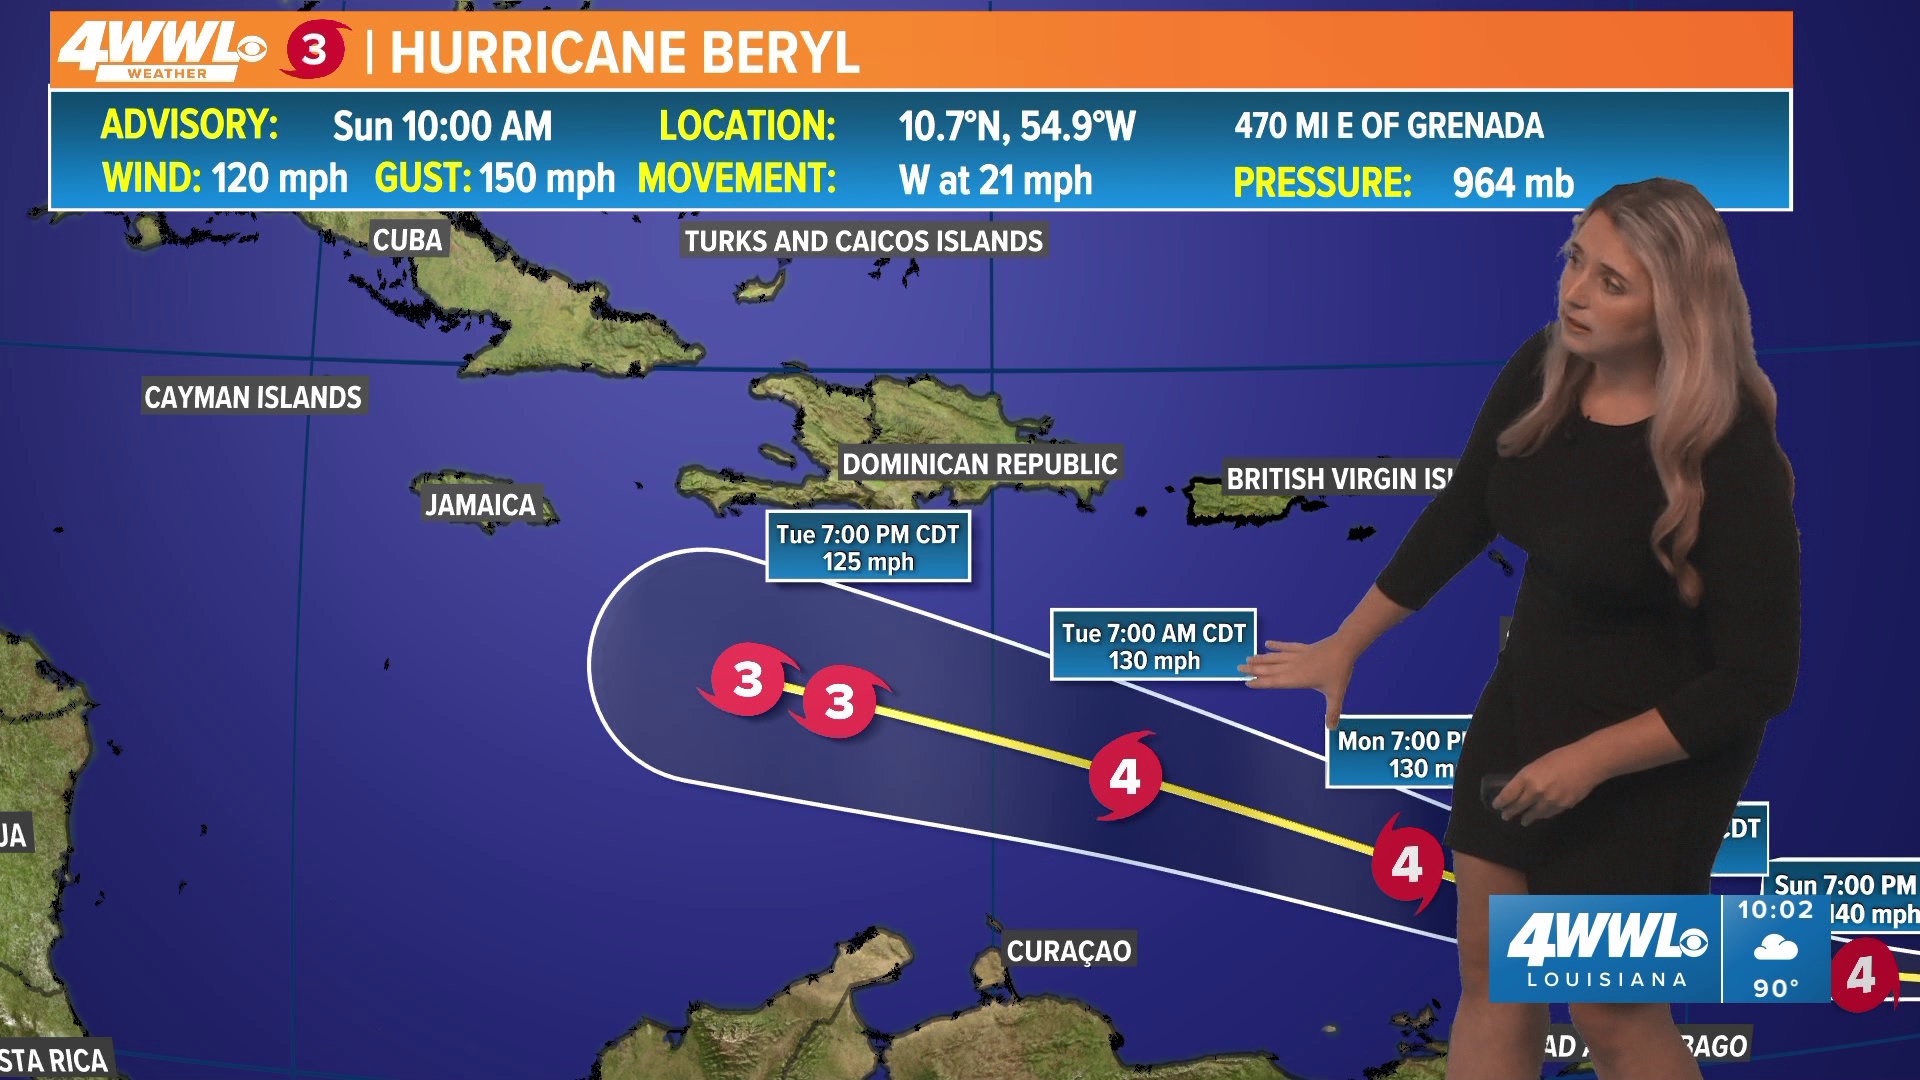 Meteorologist Alexa Trischler says Cat 3 Hurricane Beryl continues to strengthen, forecast to become category 4 late Sunday.